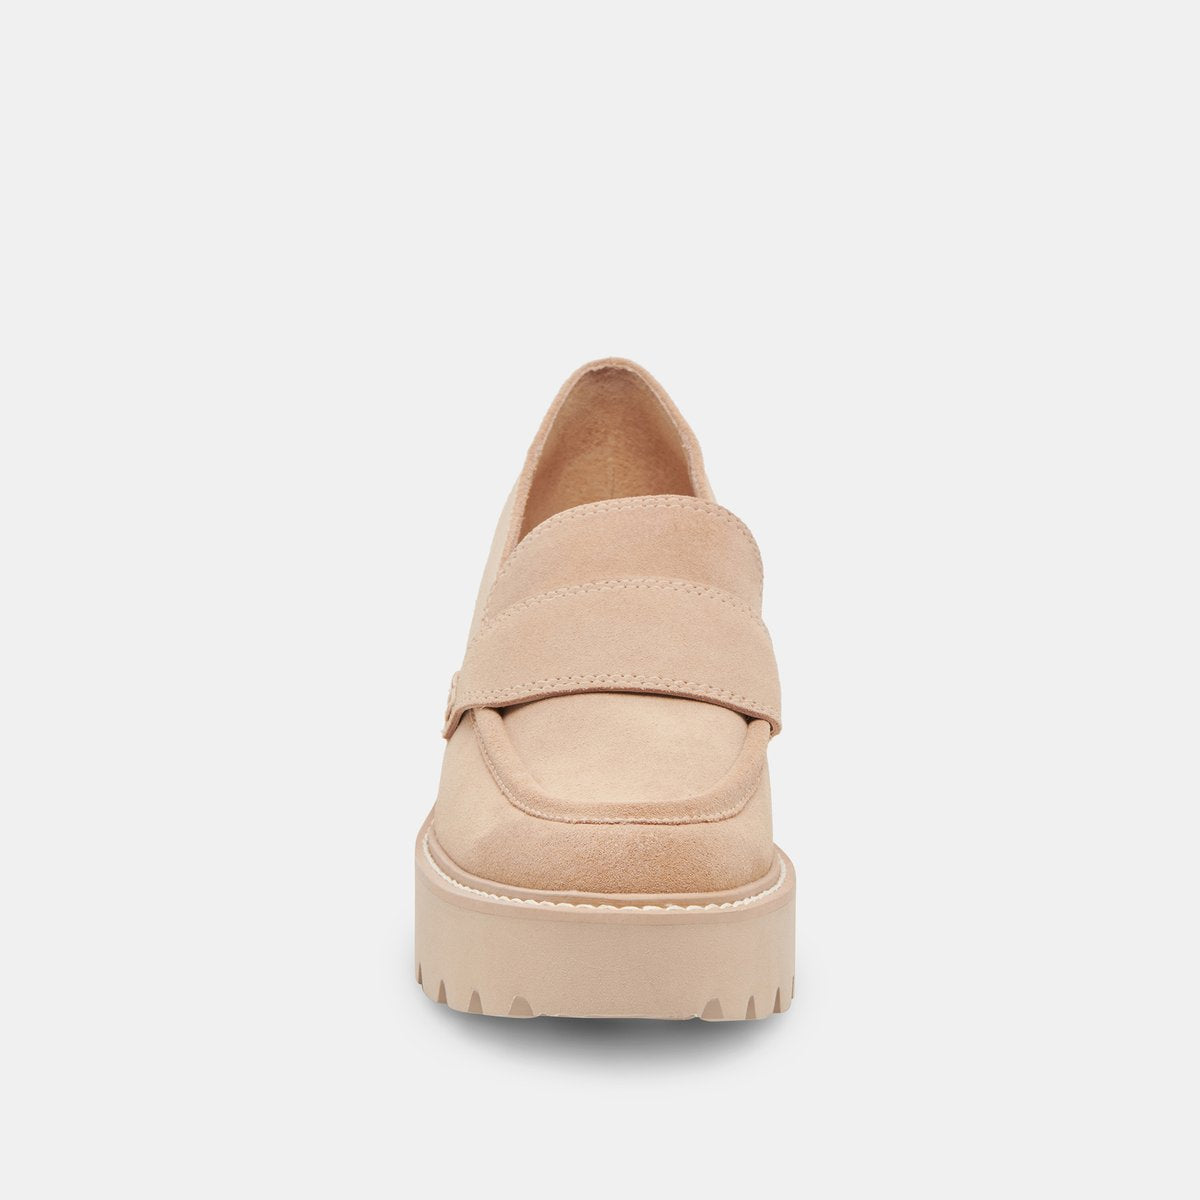 HALONA LOAFERS DUNE SUEDE – Dolce Vita